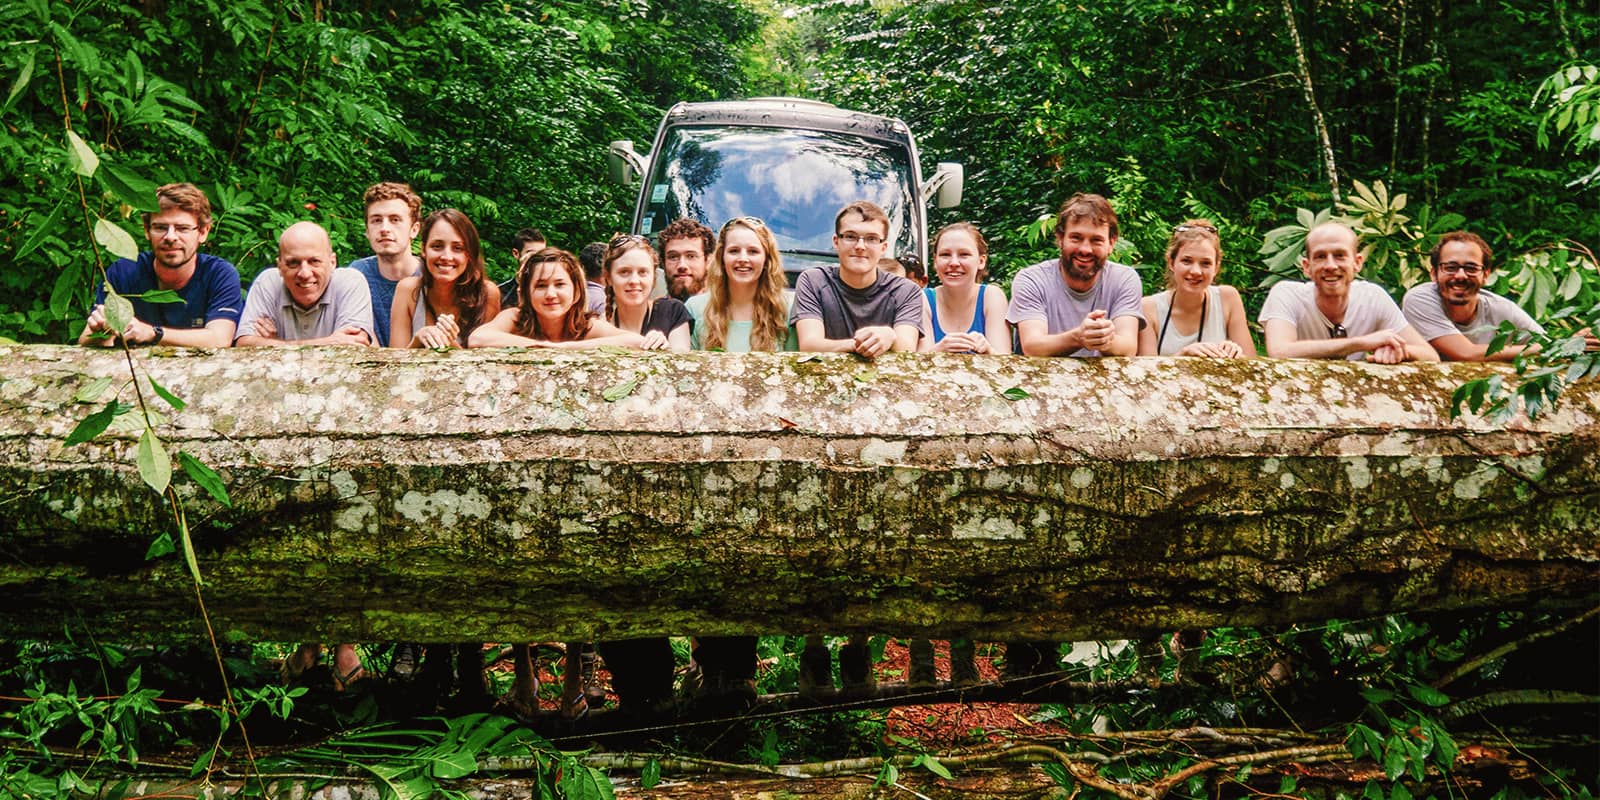 LEC Students in the Amazon Rainforest